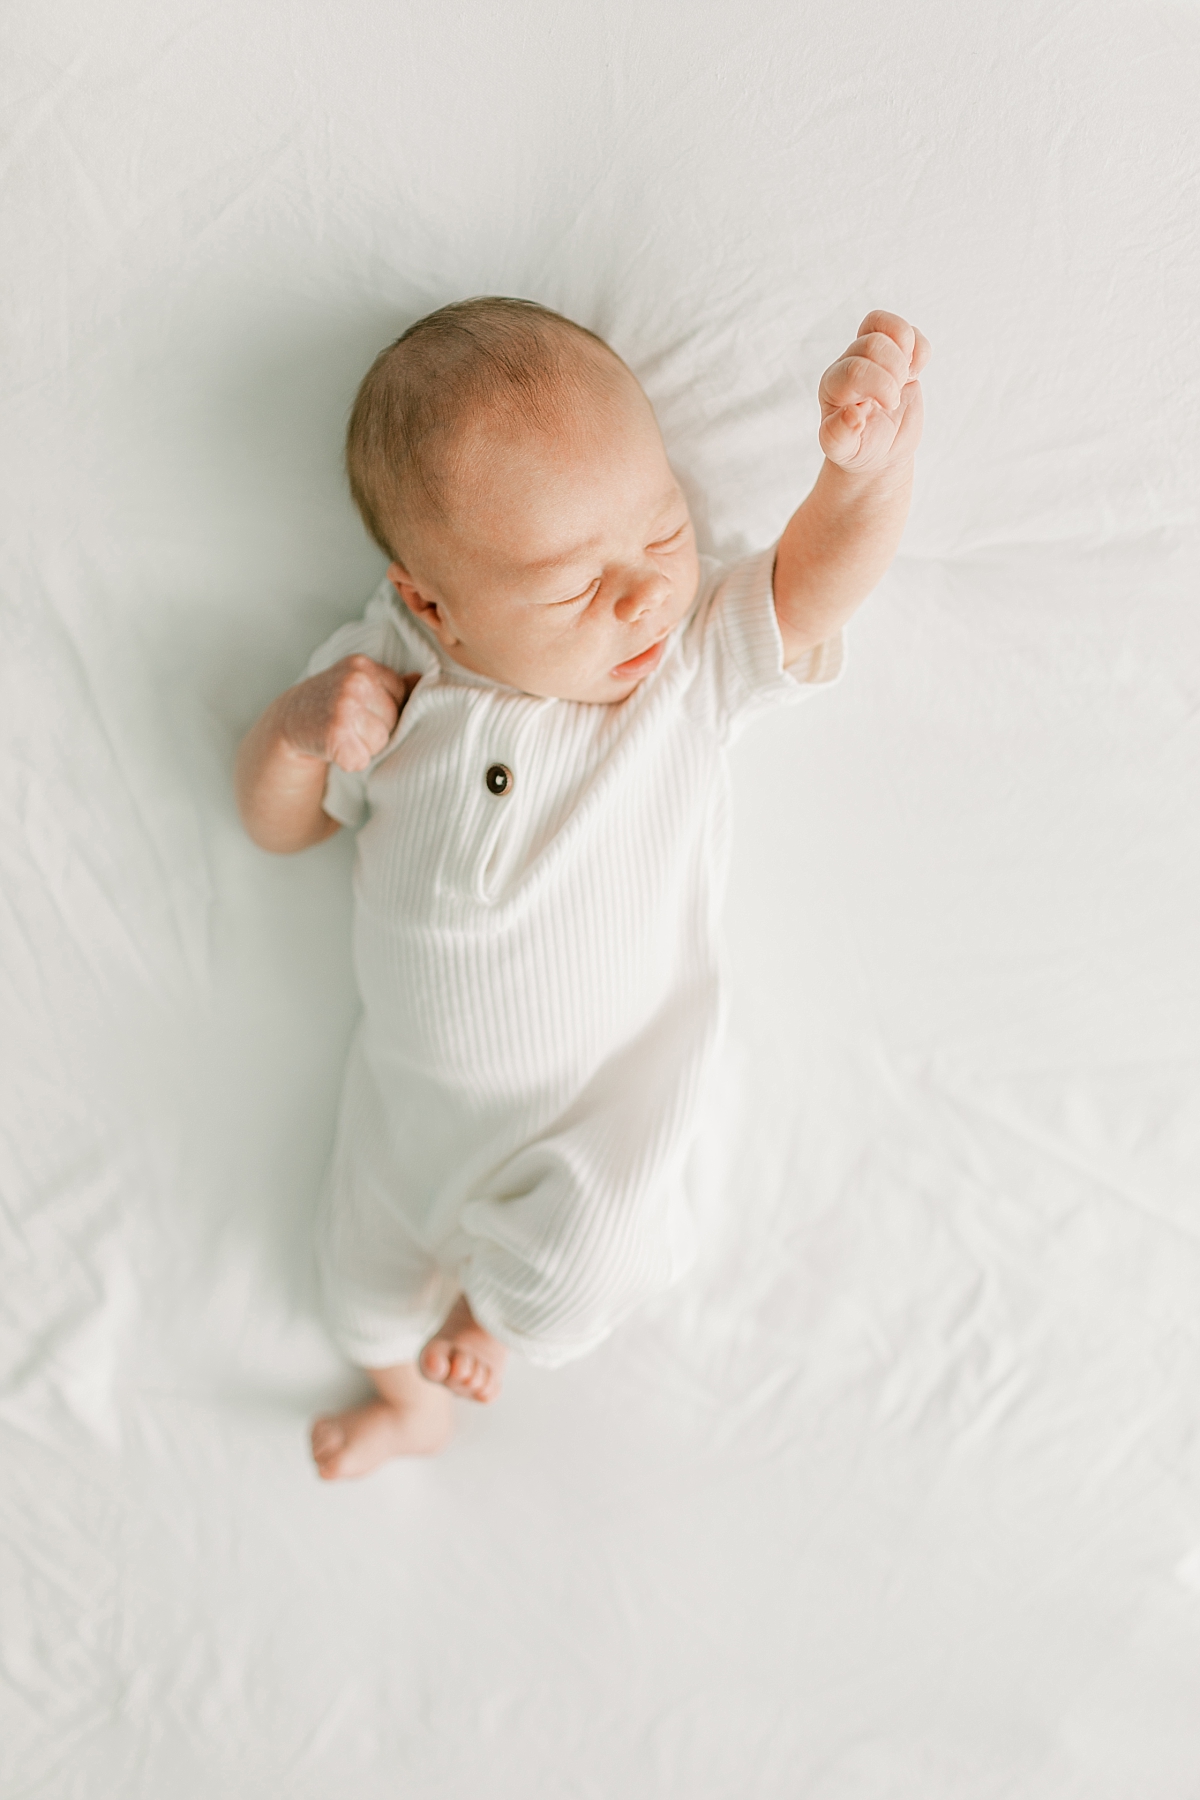 Rebecca Shivers Photography newborn photography session baby boy stretching